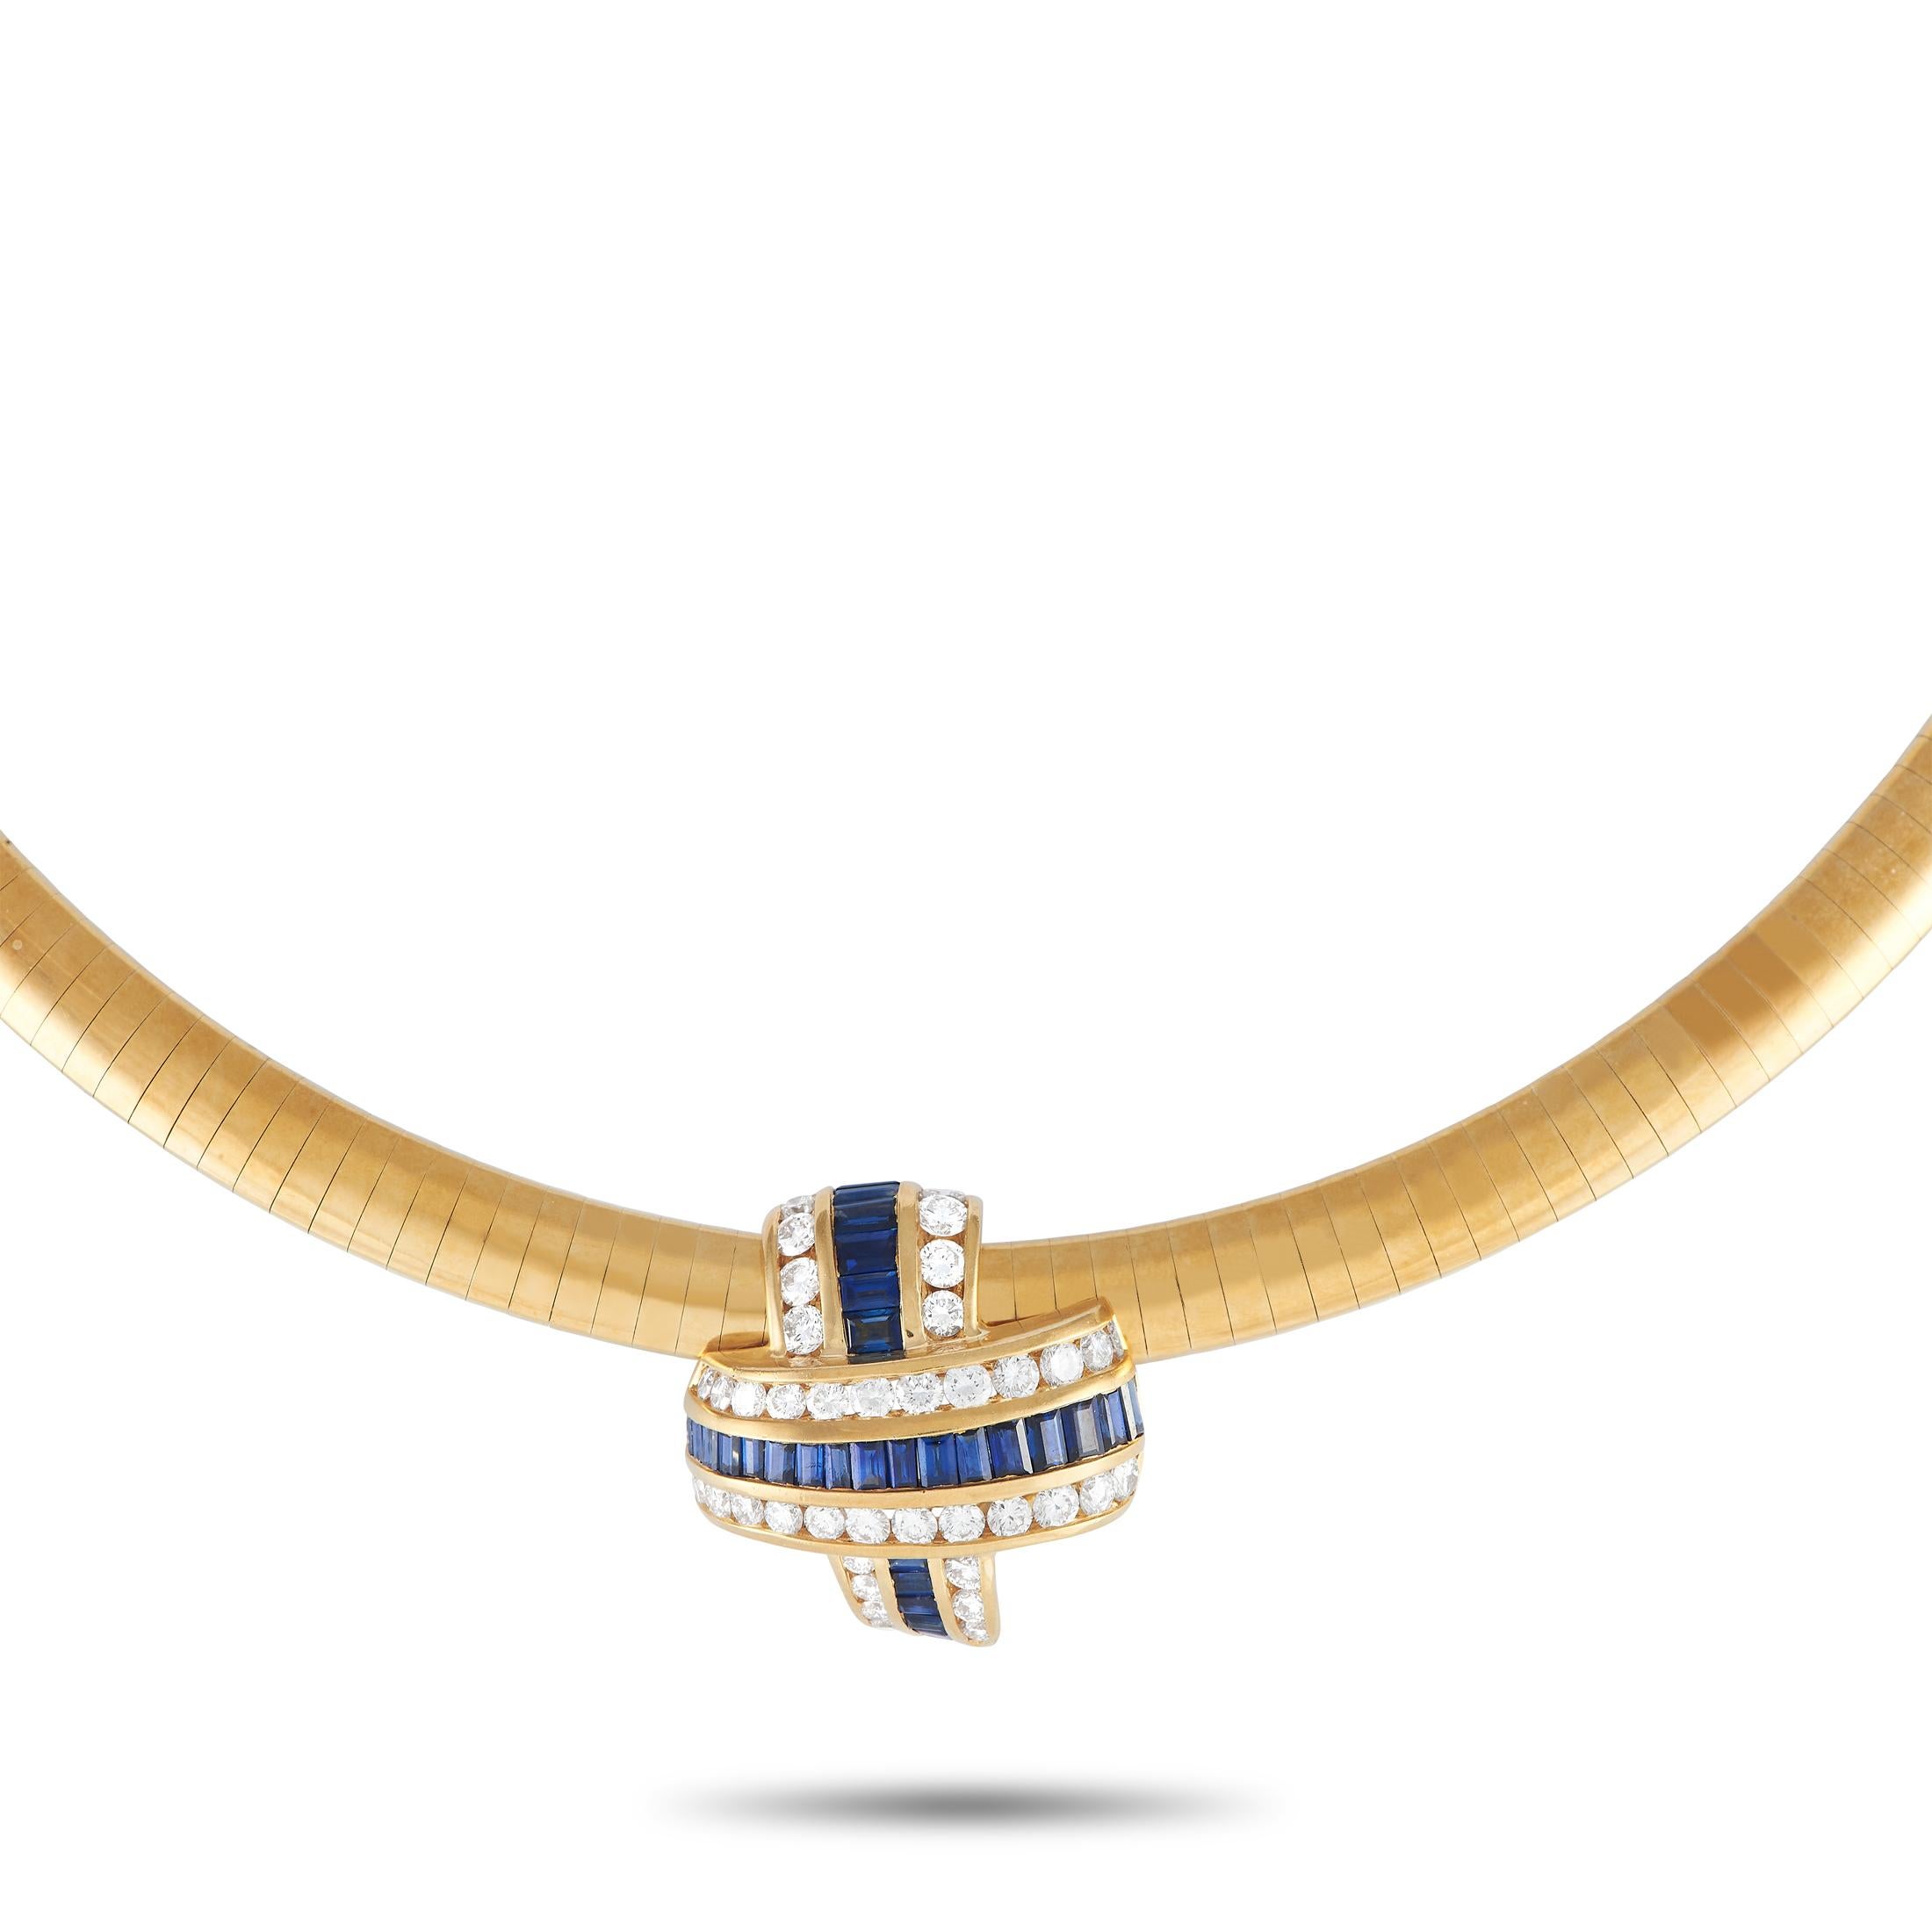 A necklace designed just like a sculpture. This jewel features a beautiful omega chain holding a ribbon-like slider pendant embellished with rows of baguette-cut sapphires and white diamonds. The slide pendant measures approximately 0.75-inch in